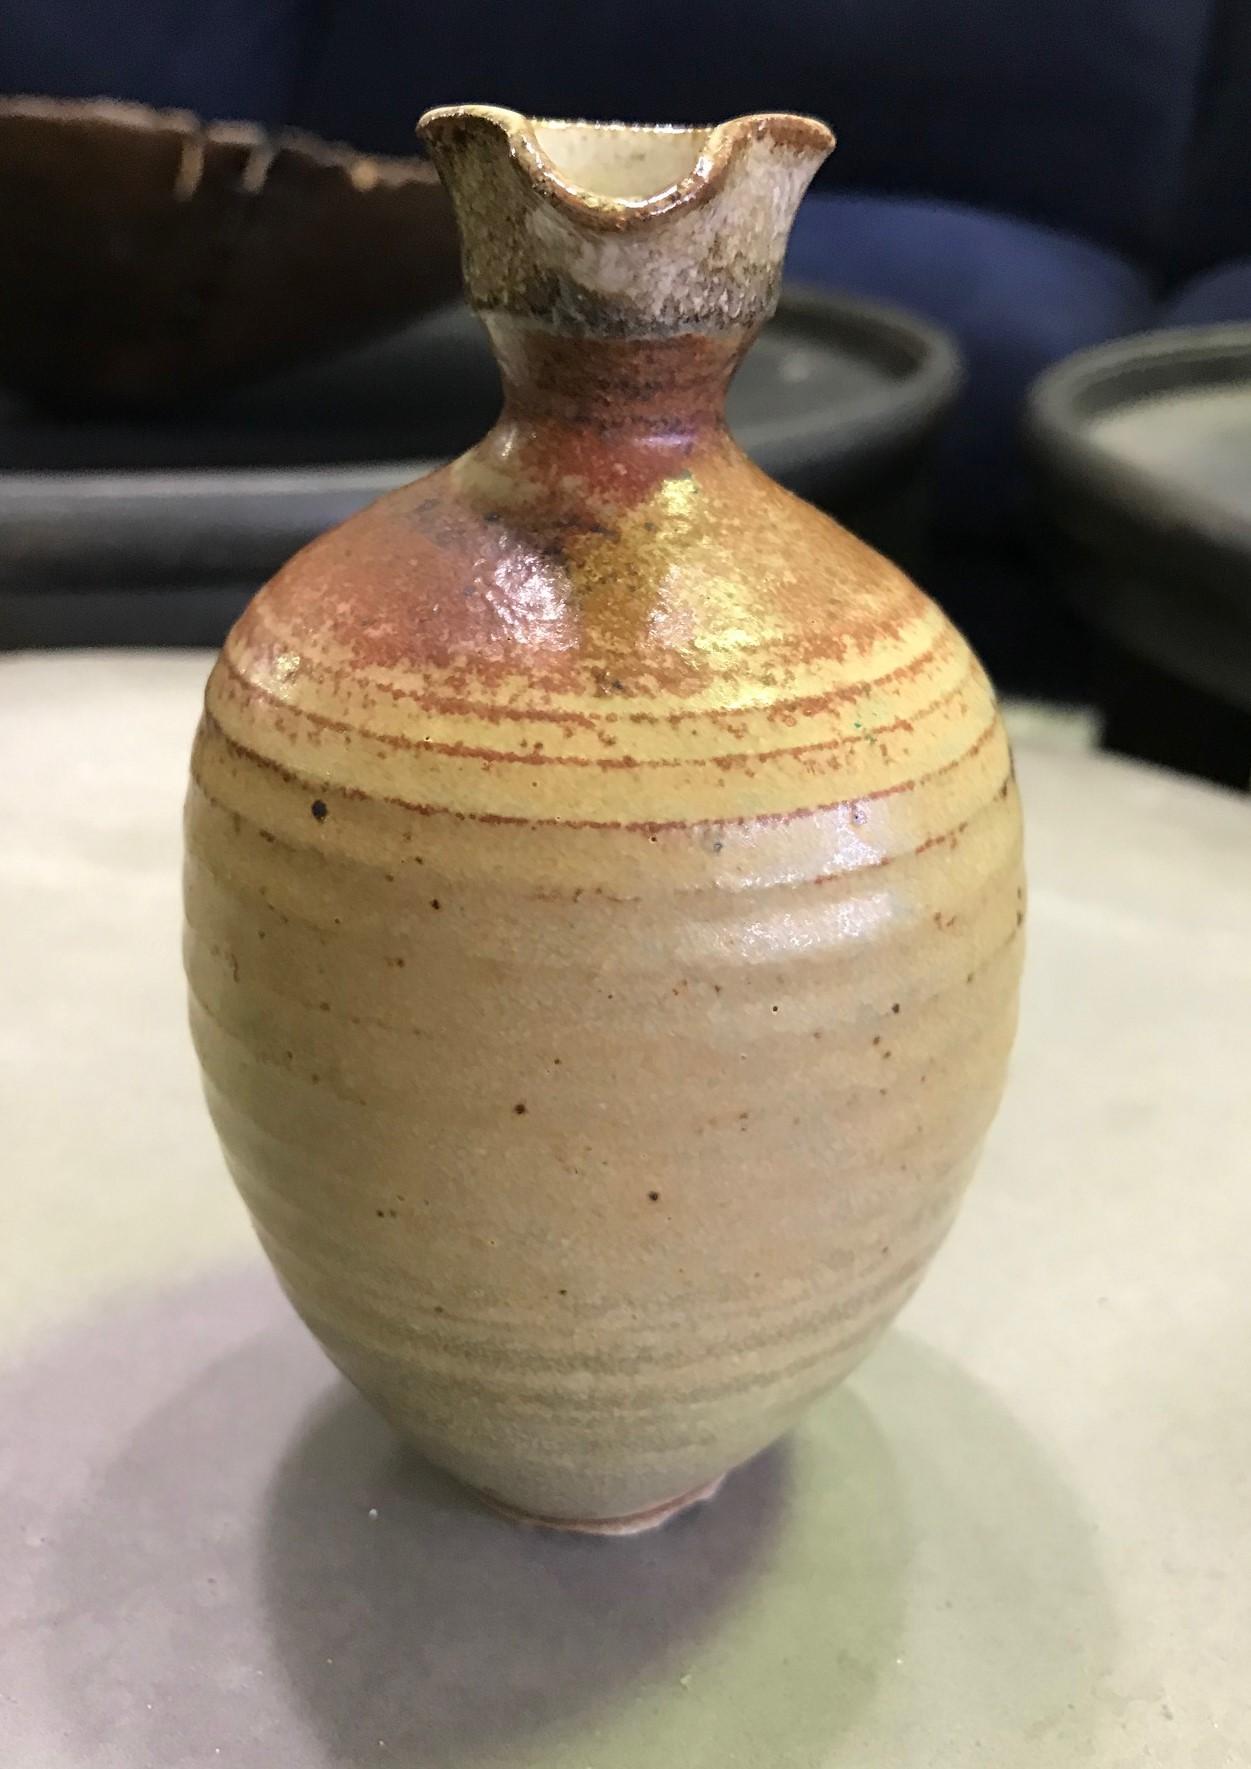 A splendid wonderfully glazed and designed gem of a vase by renowned American potter Laura Andreson. 

Signed on the base by Andreson.

Would be a great addition to any midcentury ceramics collection or a very eye-catching stand-alone